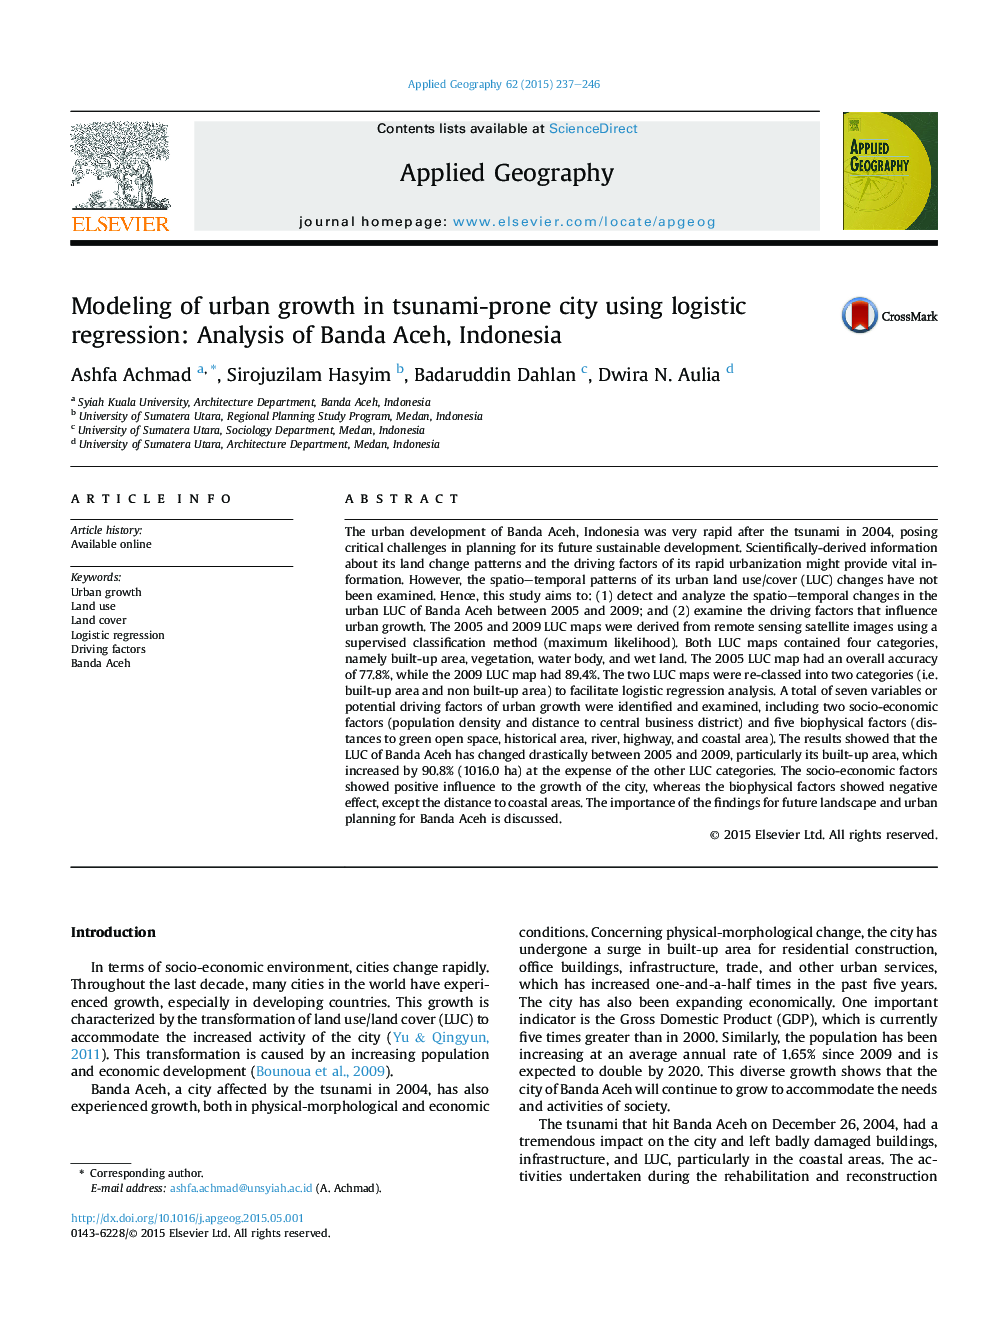 Modeling of urban growth in tsunami-prone city using logistic regression: Analysis of Banda Aceh, Indonesia